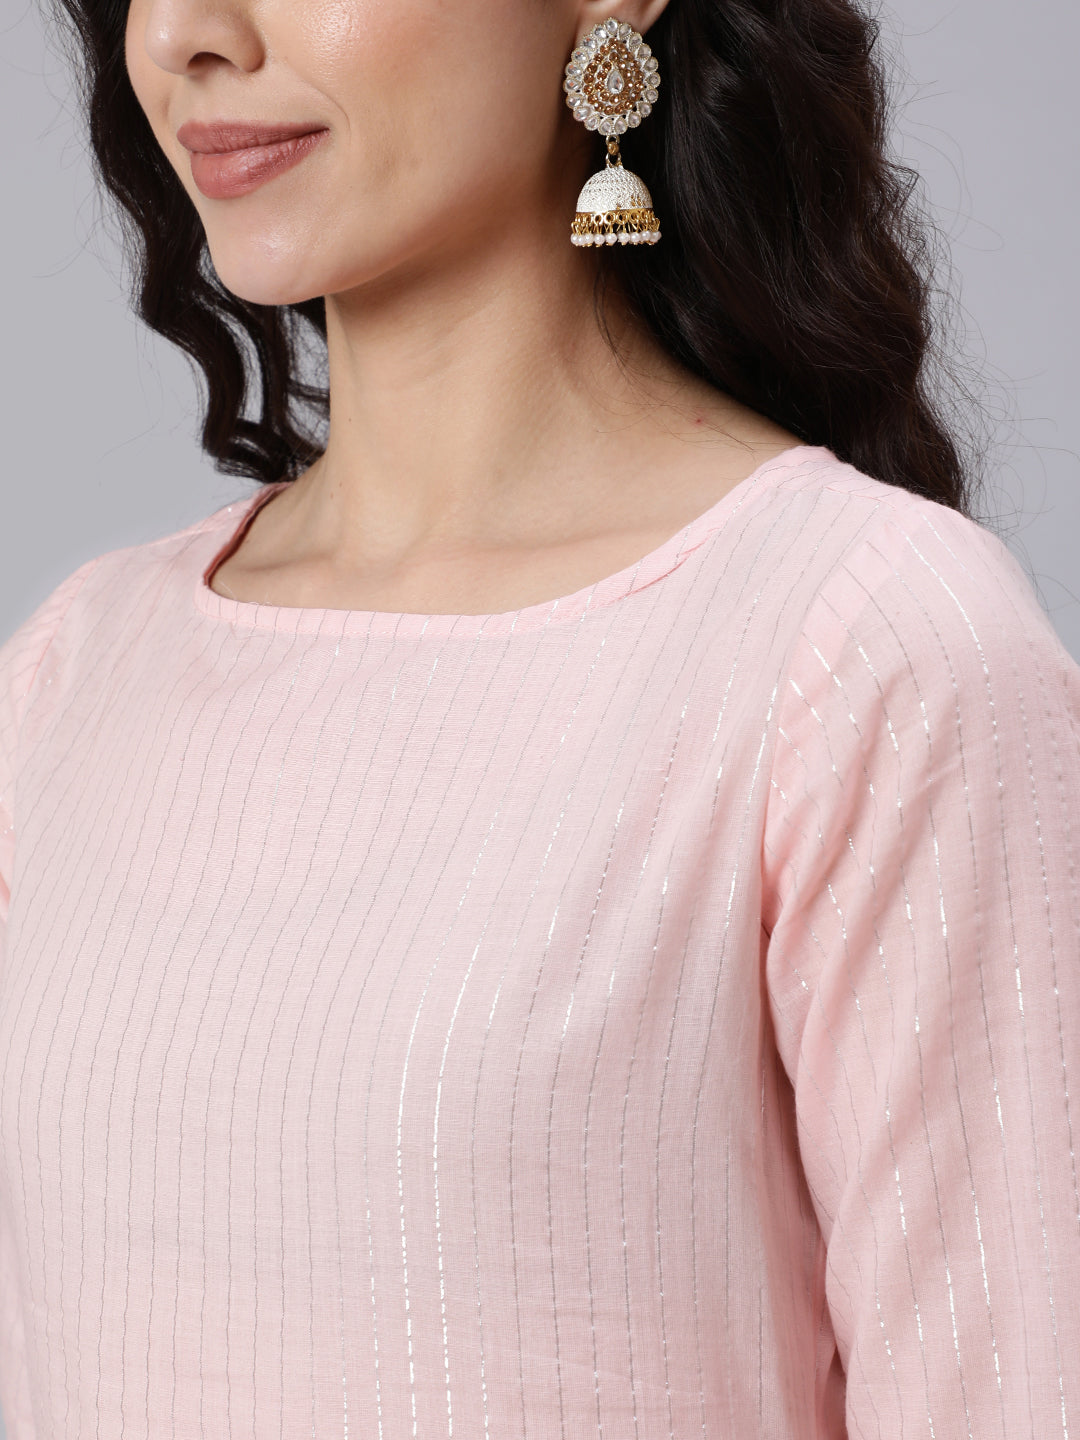 Women's Pink Color With Silver Stripe Solid Straight Kurta - Nayo Clothing